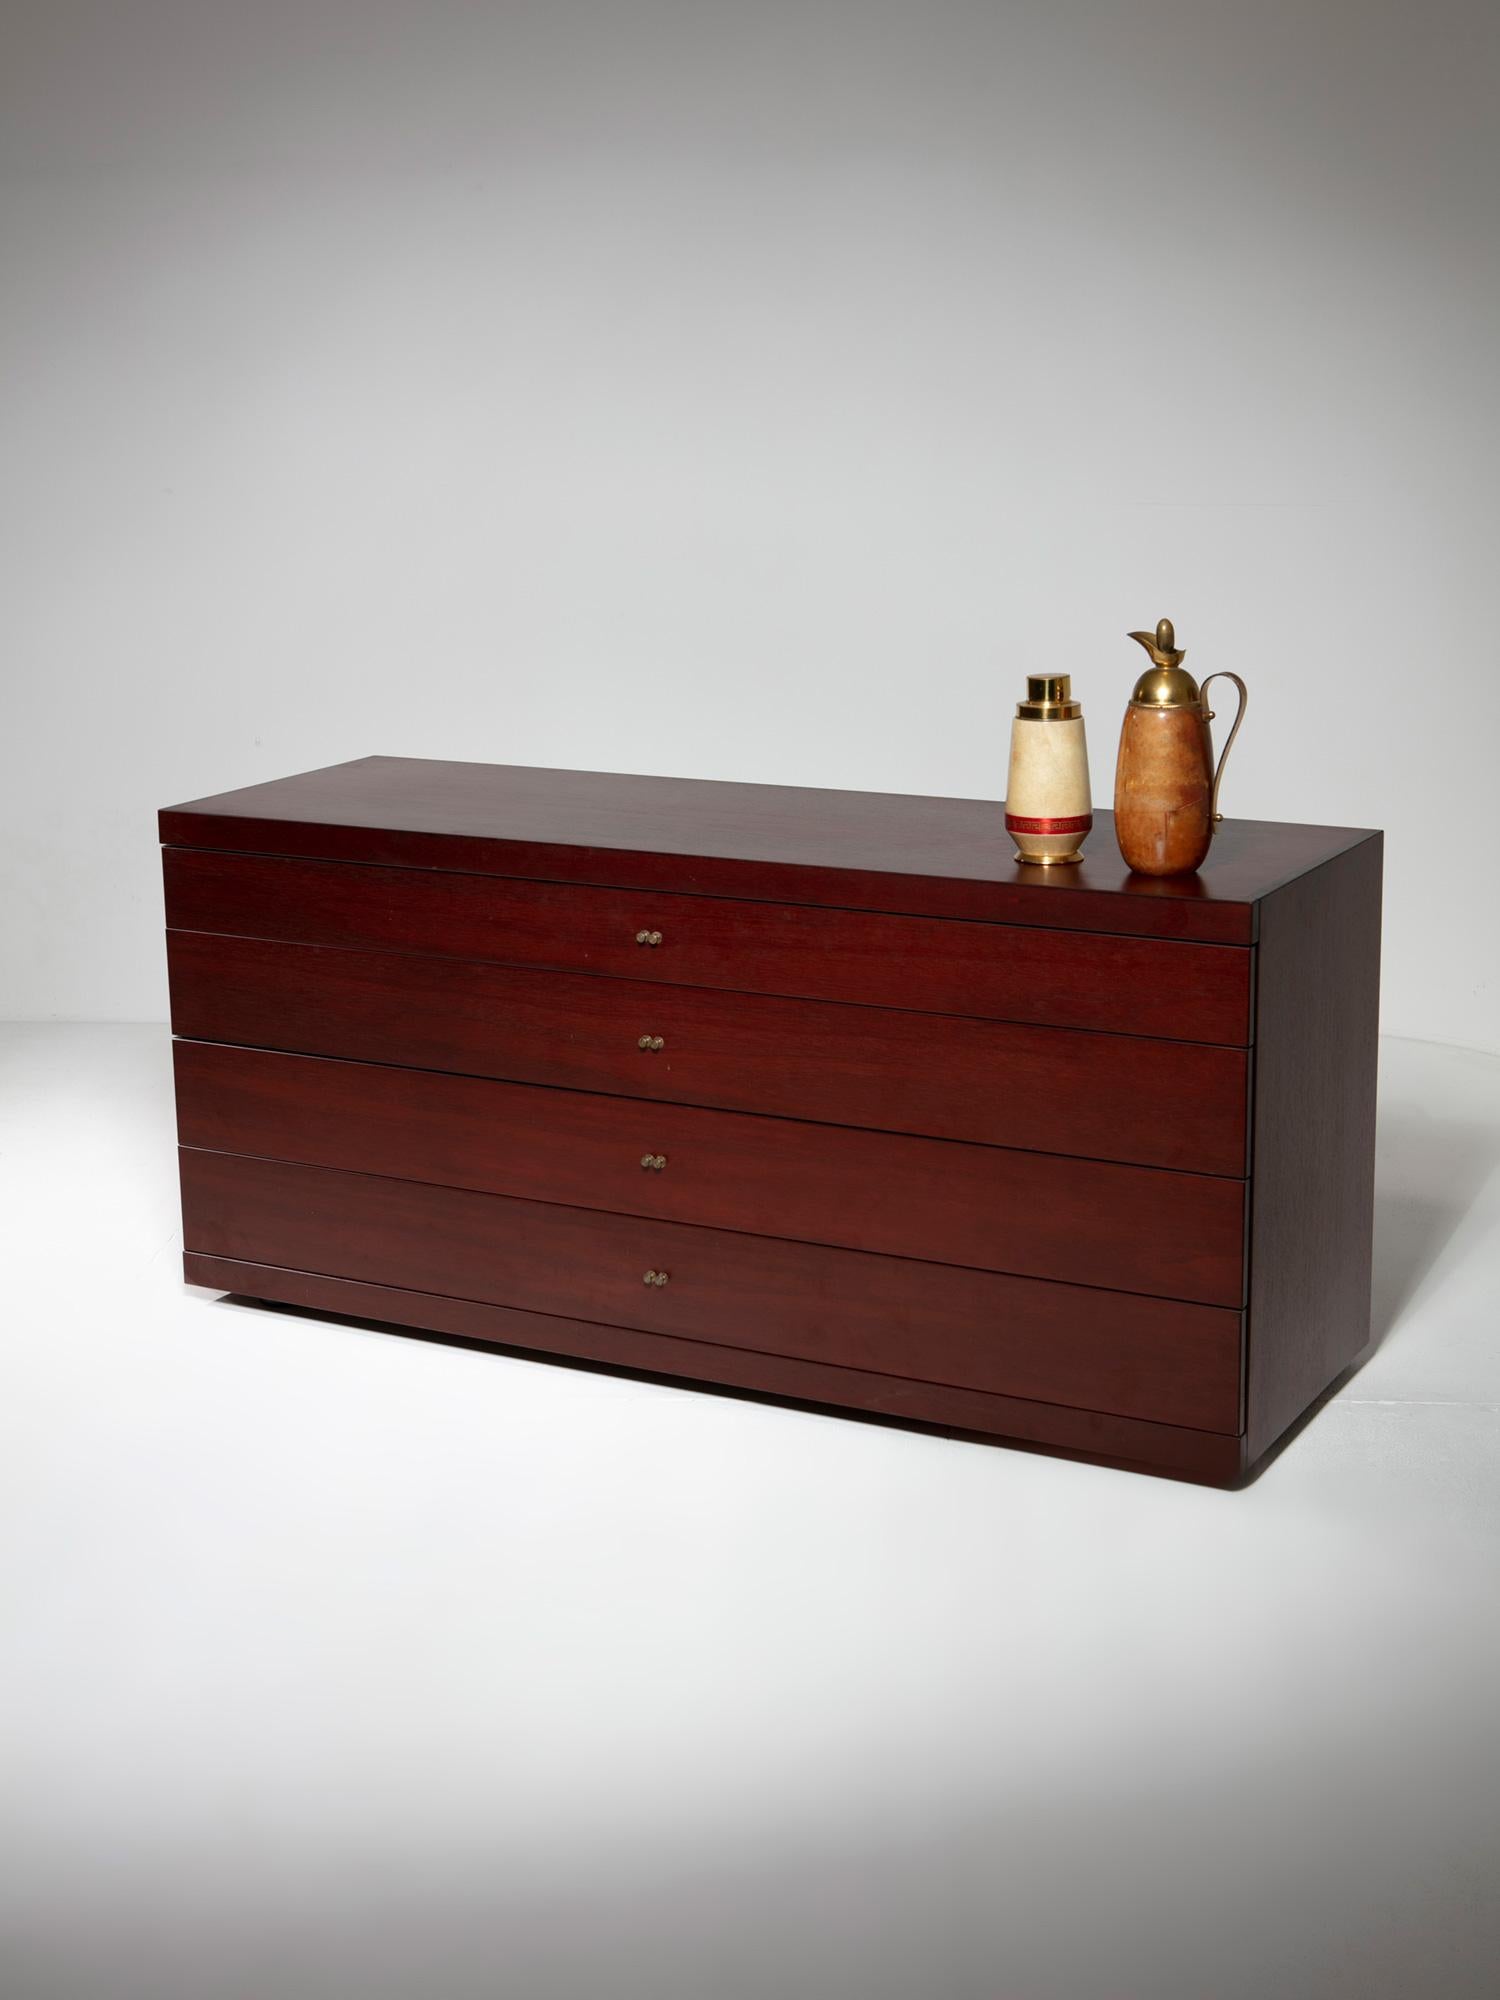 Capable MB84 Wood Chest of Drawers by Roberto Poggi for Poggi, Italy, 1990s For Sale 3